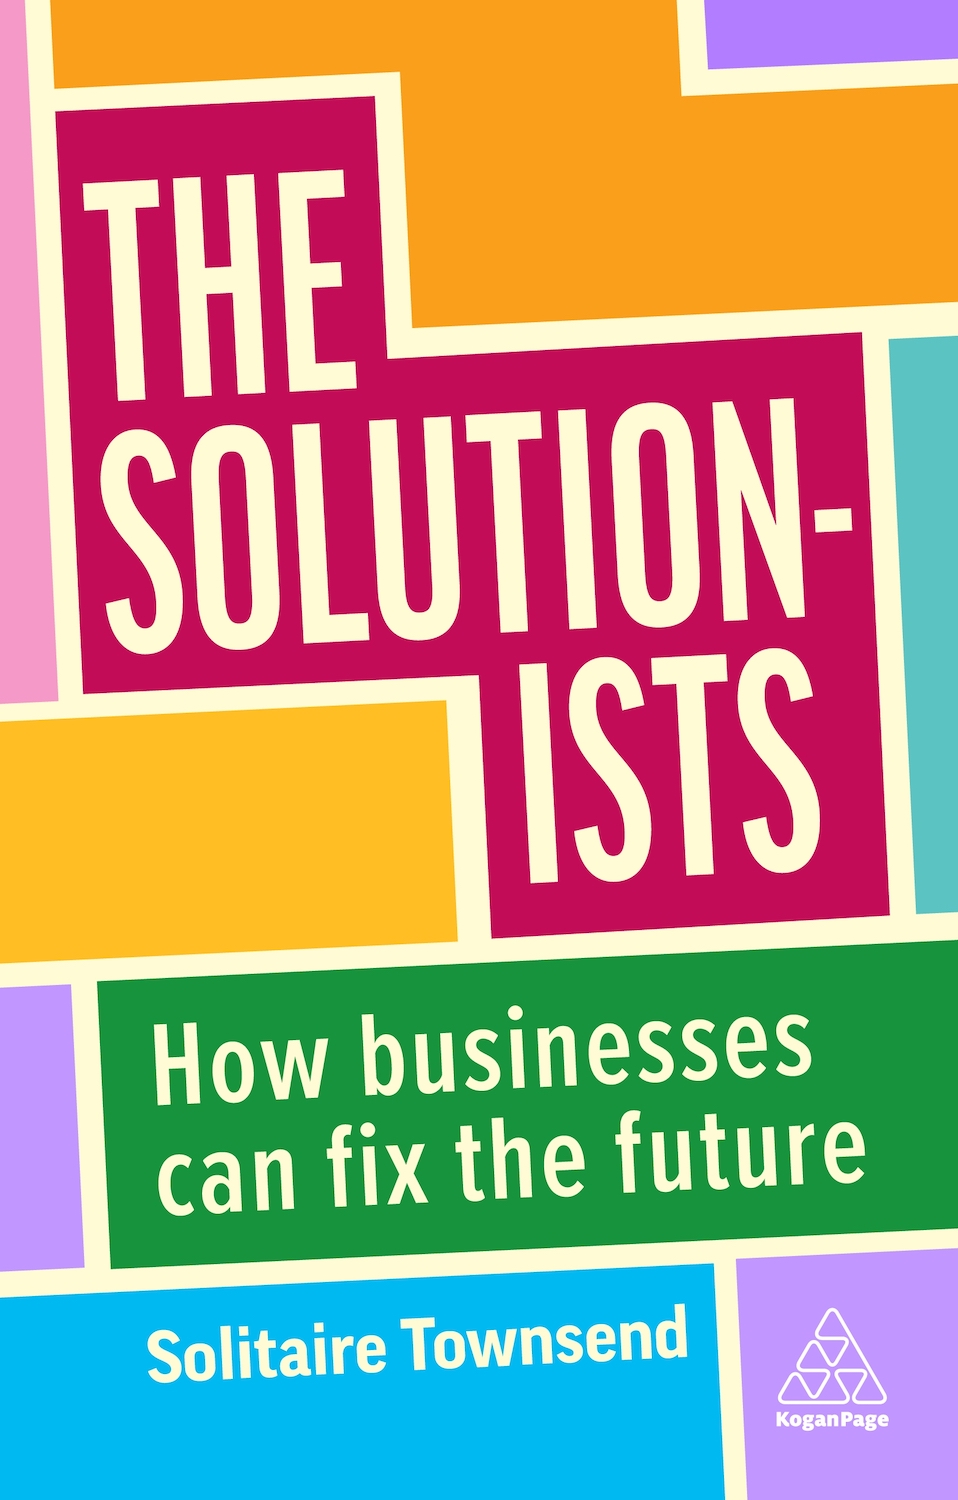 The cover of Solitaire Townsend's book "The Solutionists: How business can fix the future." 